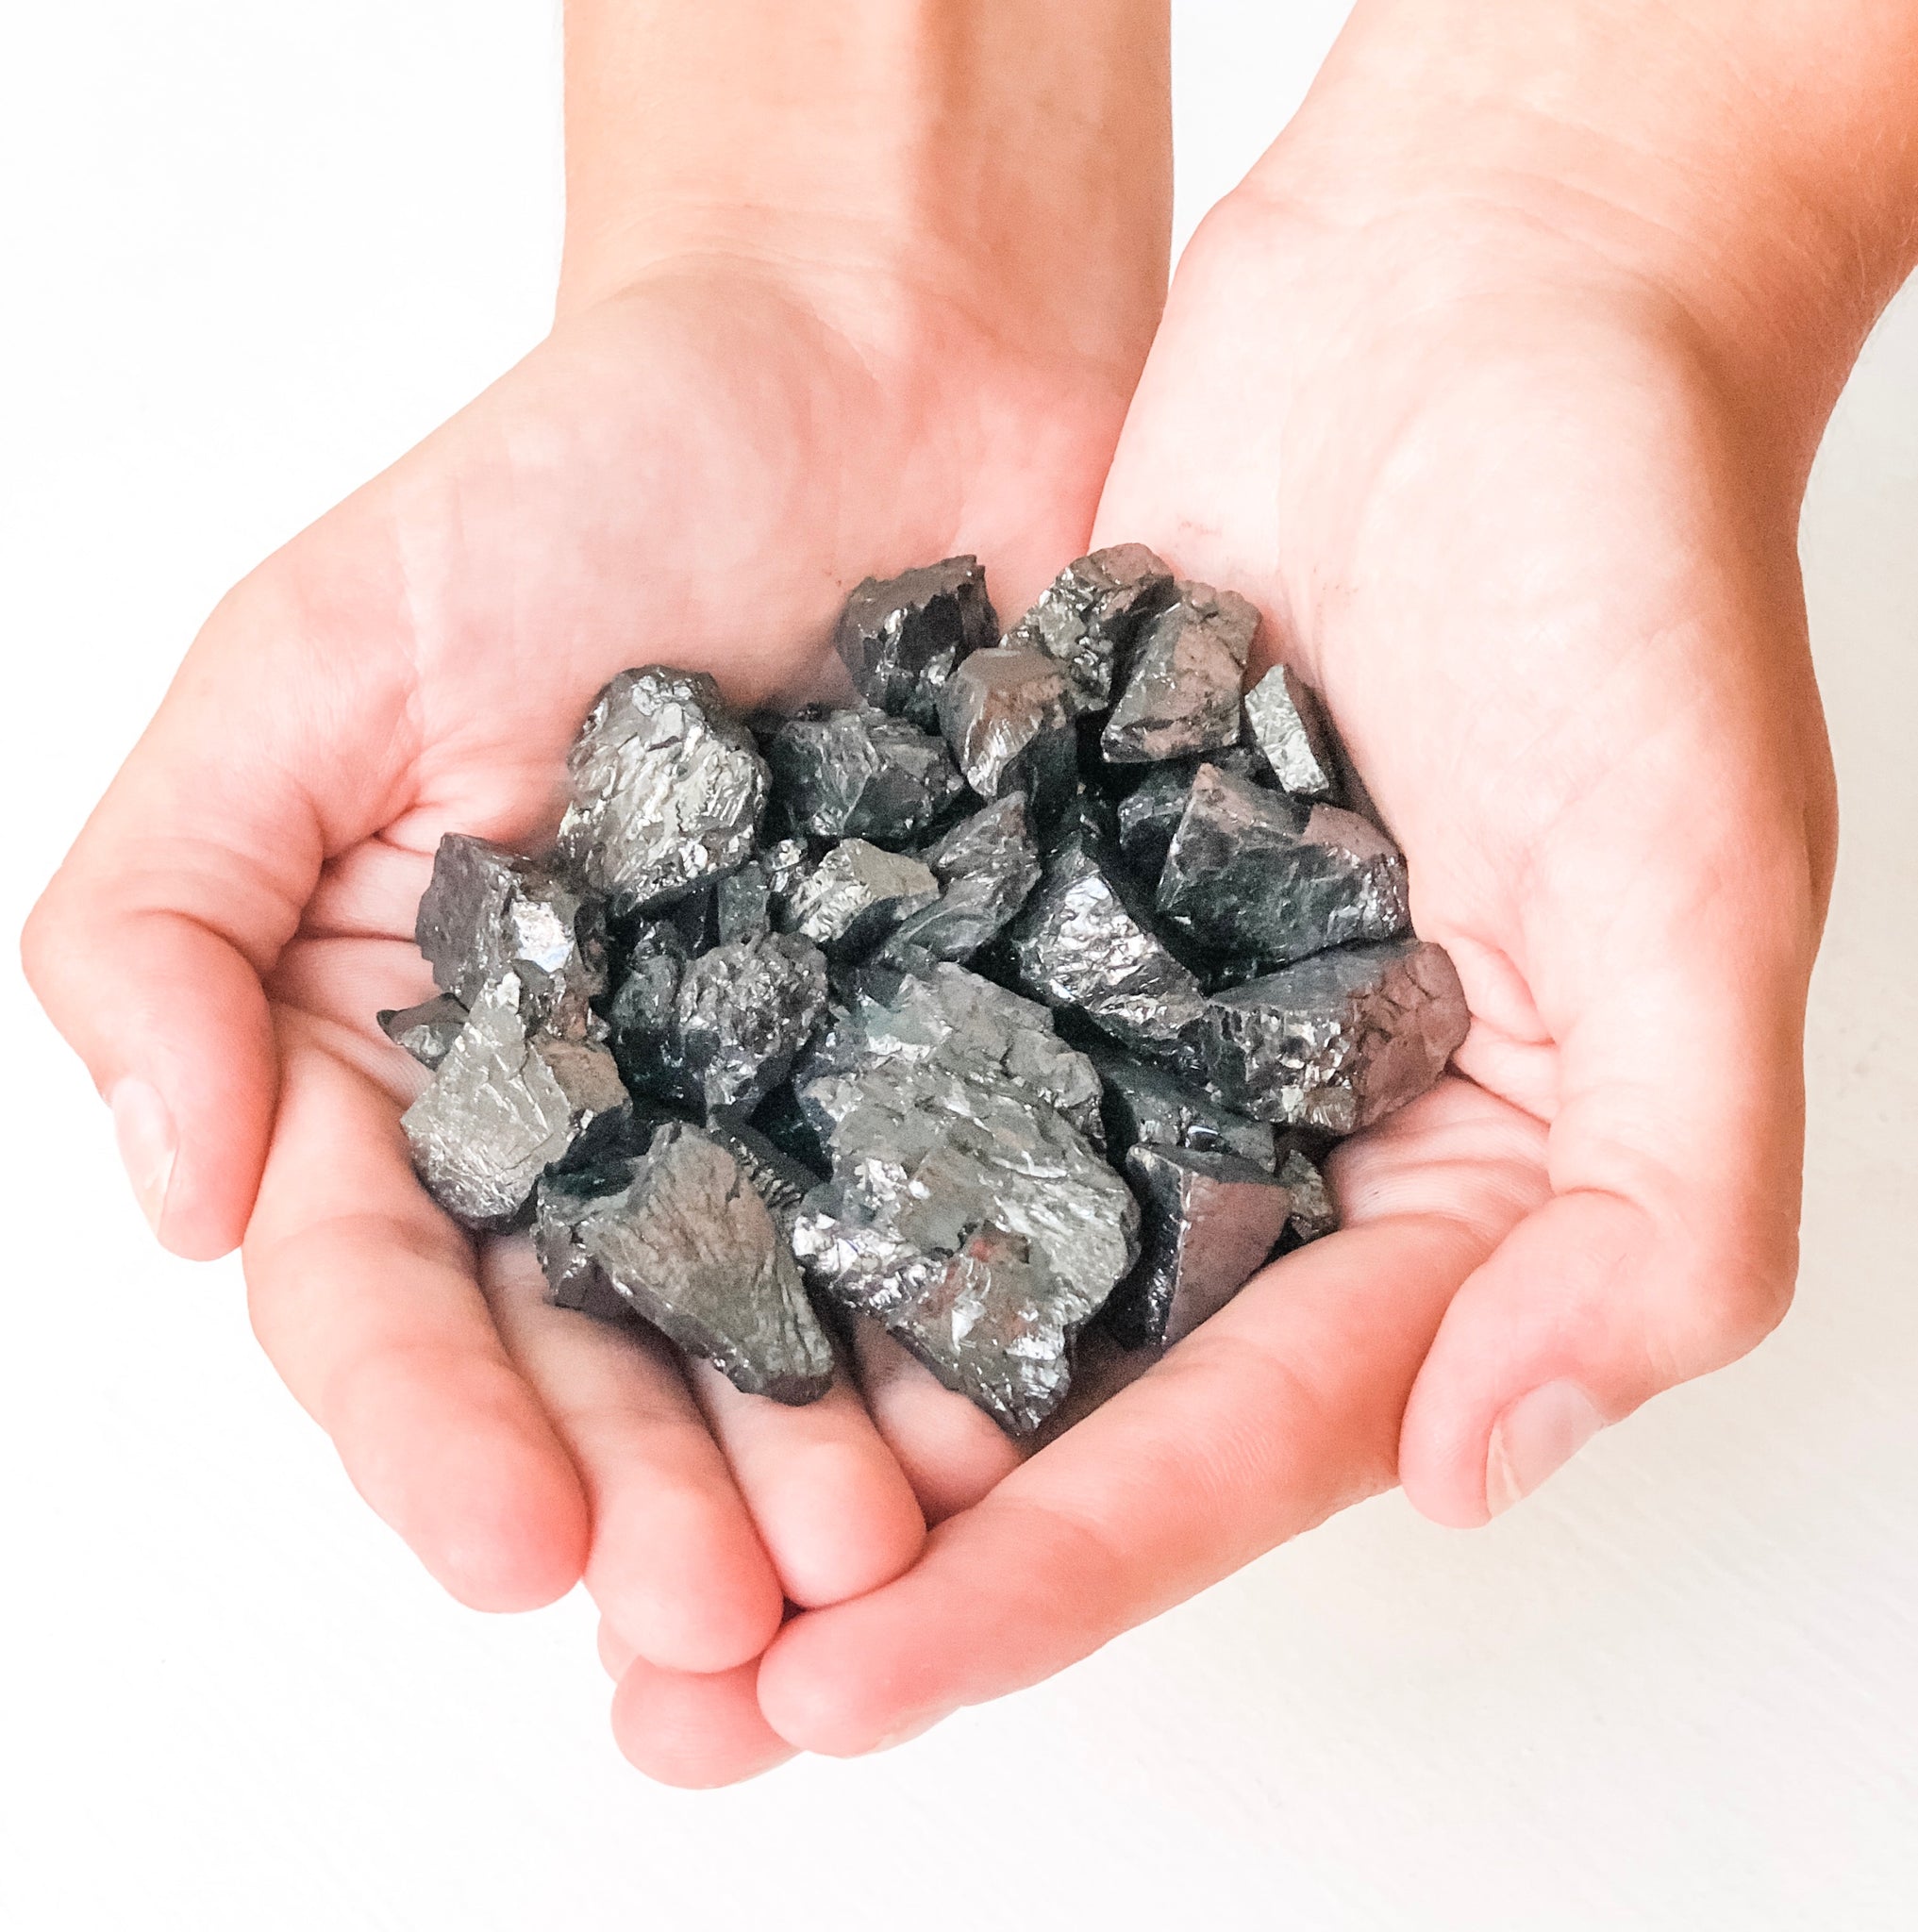 Shungite: The powerful stone that may protect your family from EMF radiation